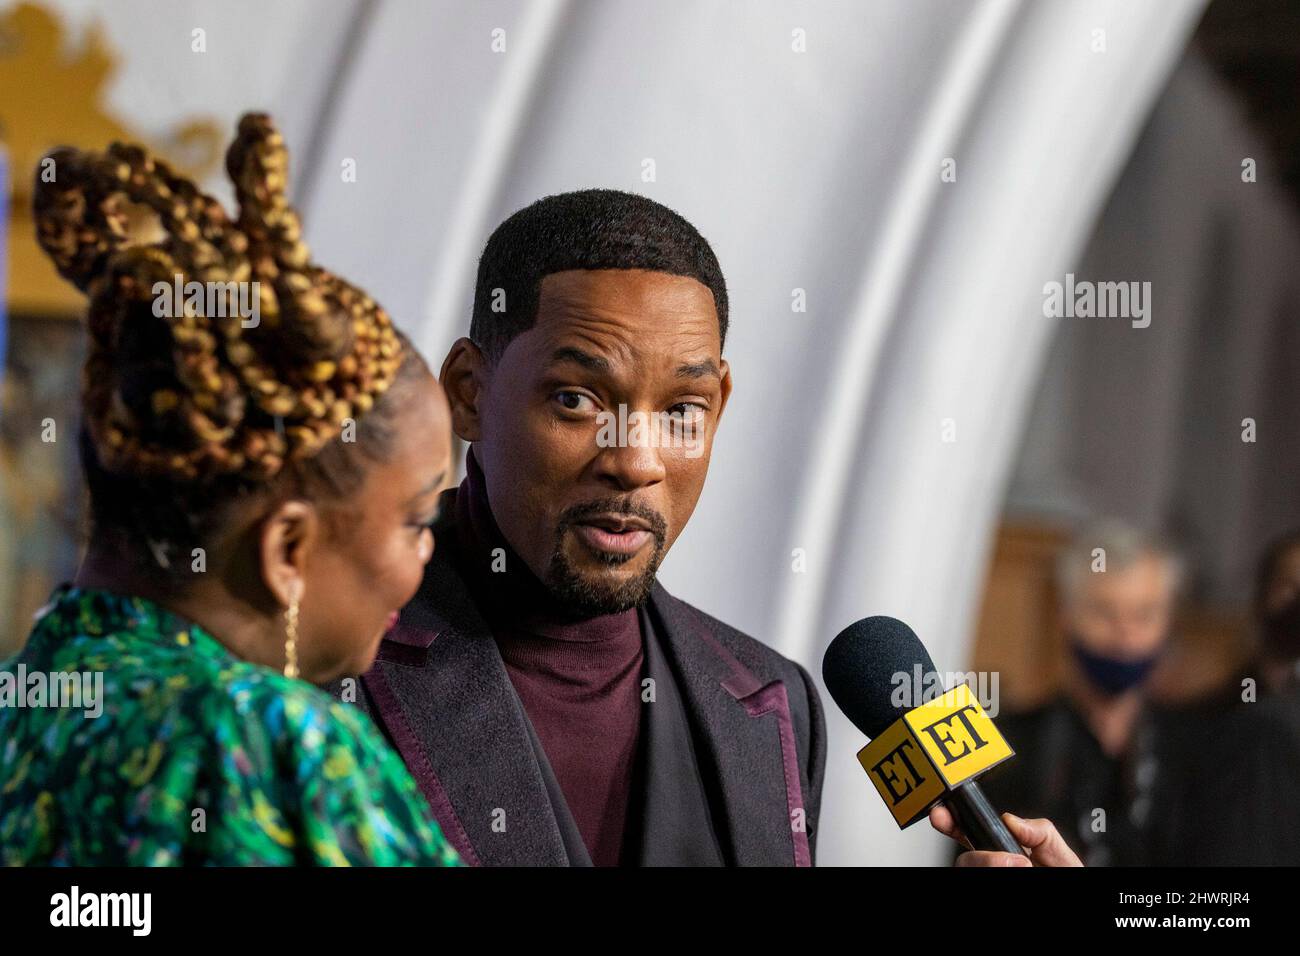 Aunjanue Ellis, Will Smith being interviewed on the red carpet at the 37th Santa Barbara International Film Festival Honoring Will Smith and Aunjanue Ellis with the Outstanding Performers of the Year Award at the Arlington Theater in Santa Barbara, California, March 6, 2022.  (Photo by Rod Rolle/Sipa USA) Stock Photo